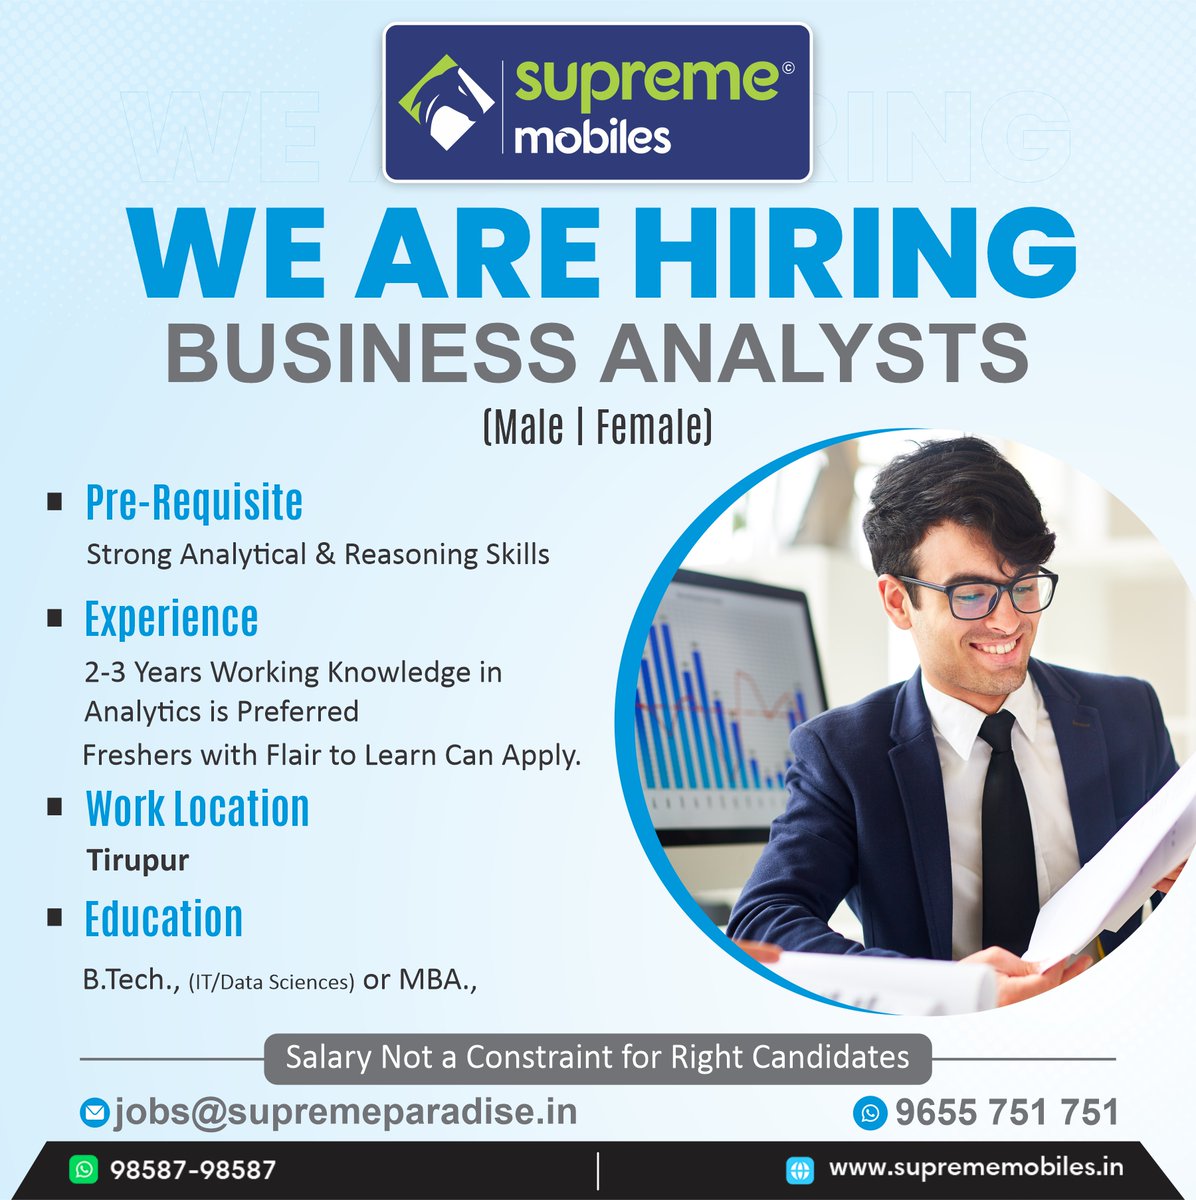 We are Hiring

Business Analysts

Send Your CV to jobs@supremeparadise.in

For Details: 9655751751

#Suprememobiles #jobs #jobseekers #jobs #jobs2023 #jobsearch #jobshiring #jobsearching #wearehiring #wearehiringnow #wearehiringnow‼️ #wearehiringportunities #tirupur #tirupurnews